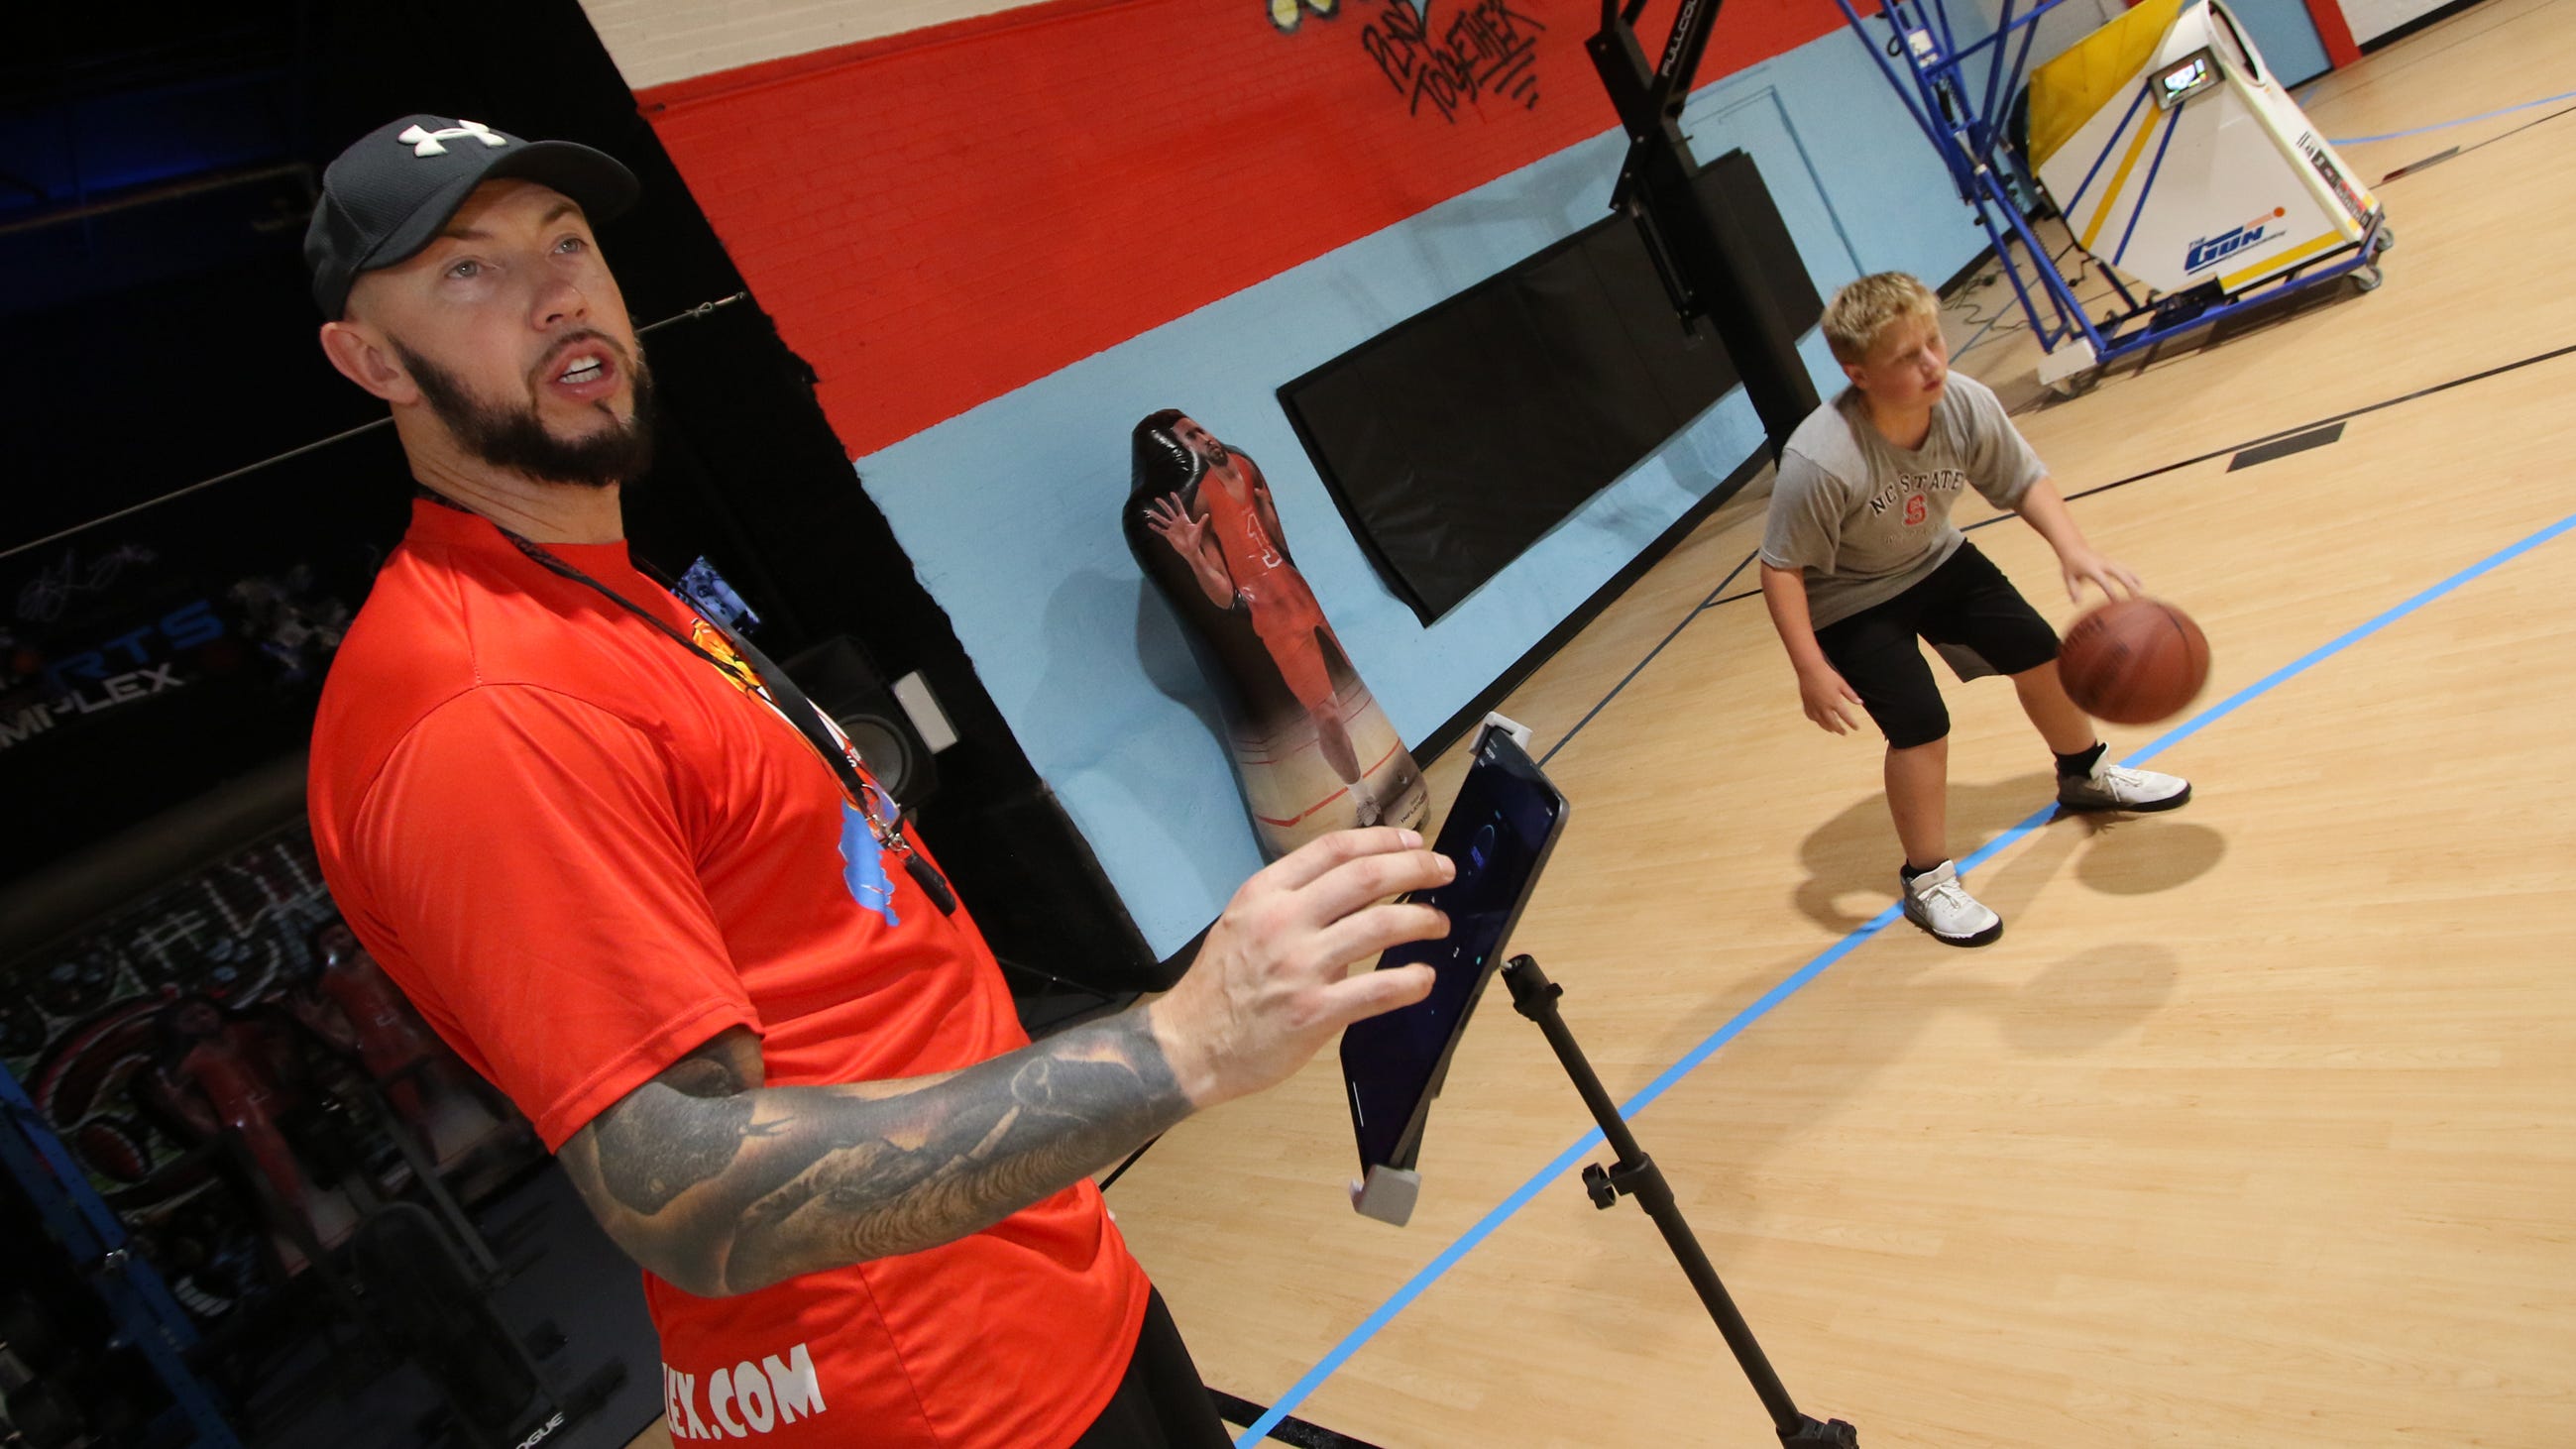  Hoop it up at 24-hour Belmont gym opened by former UNC basketball player Kris Lang 